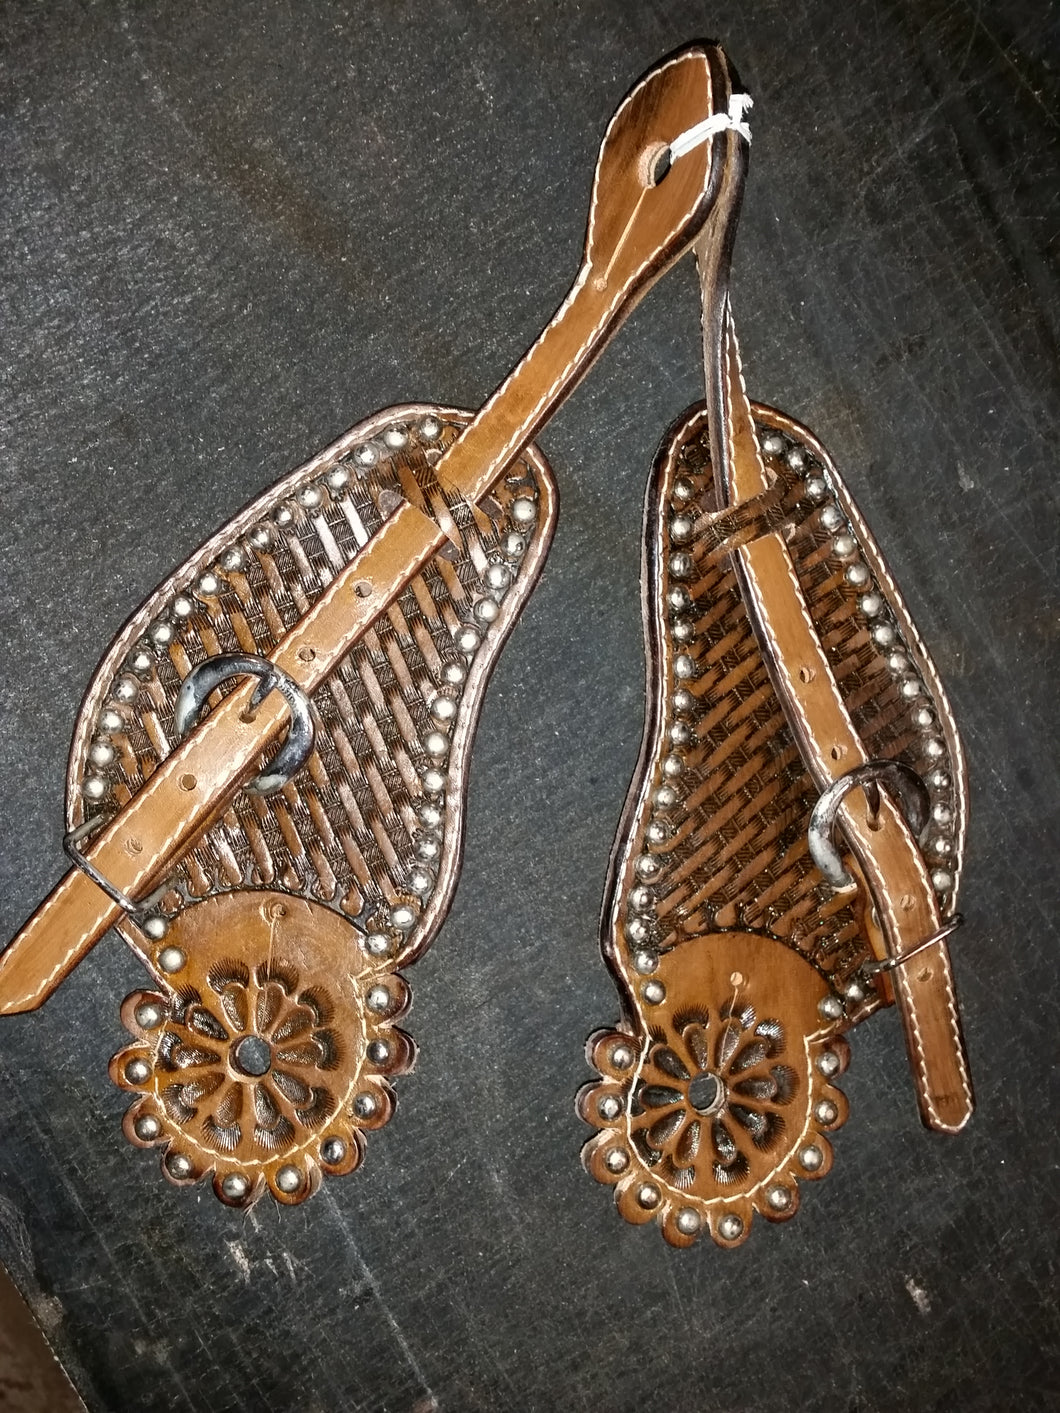 Basket Weave Tooled Spur Straps with Silver Spots